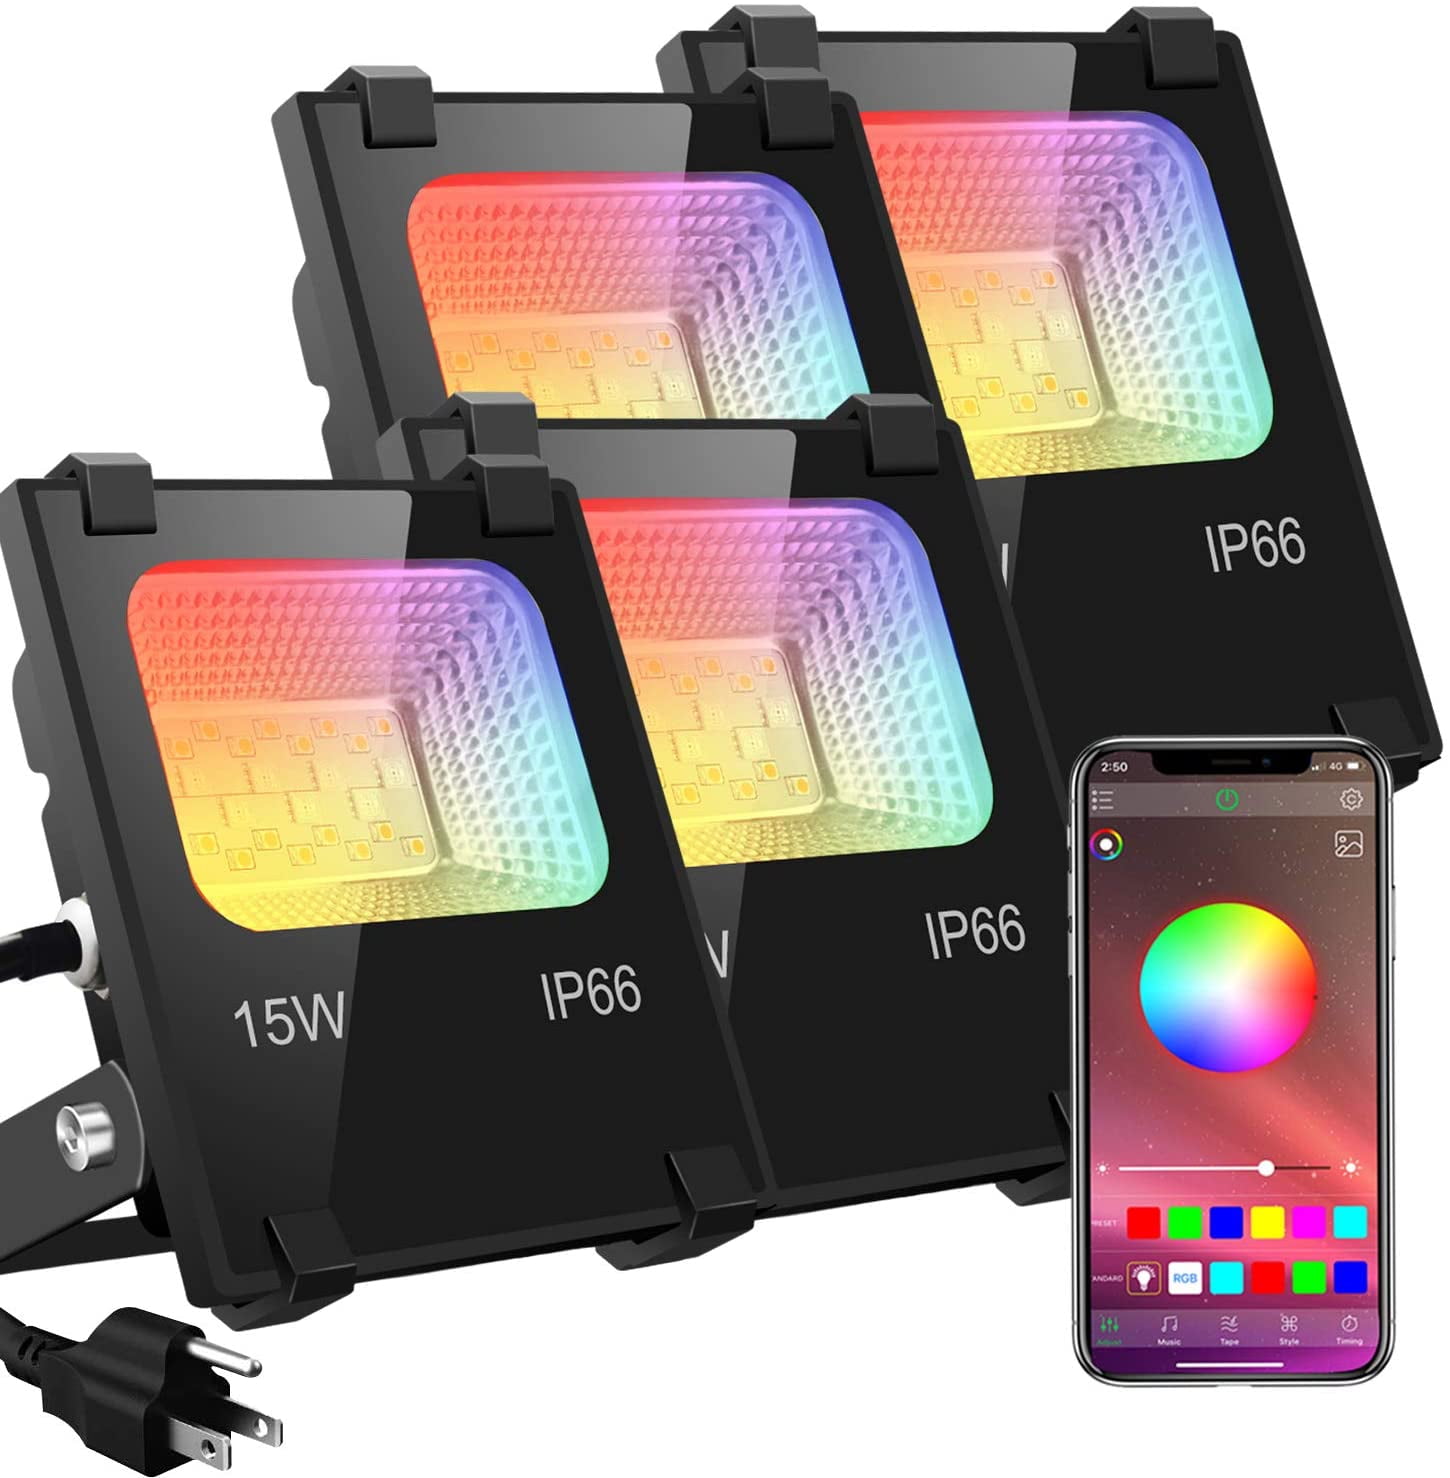 LED Flood Lights RGB Color Changing 100W Equivalent Outdoor, 15W Bluetooth Smart Floodlights RGB APP Control, Waterproof, Timing, 2700K&16 Million Colors 20 Modes for Garden Stage Lighting 4 Pack - Walmart.com